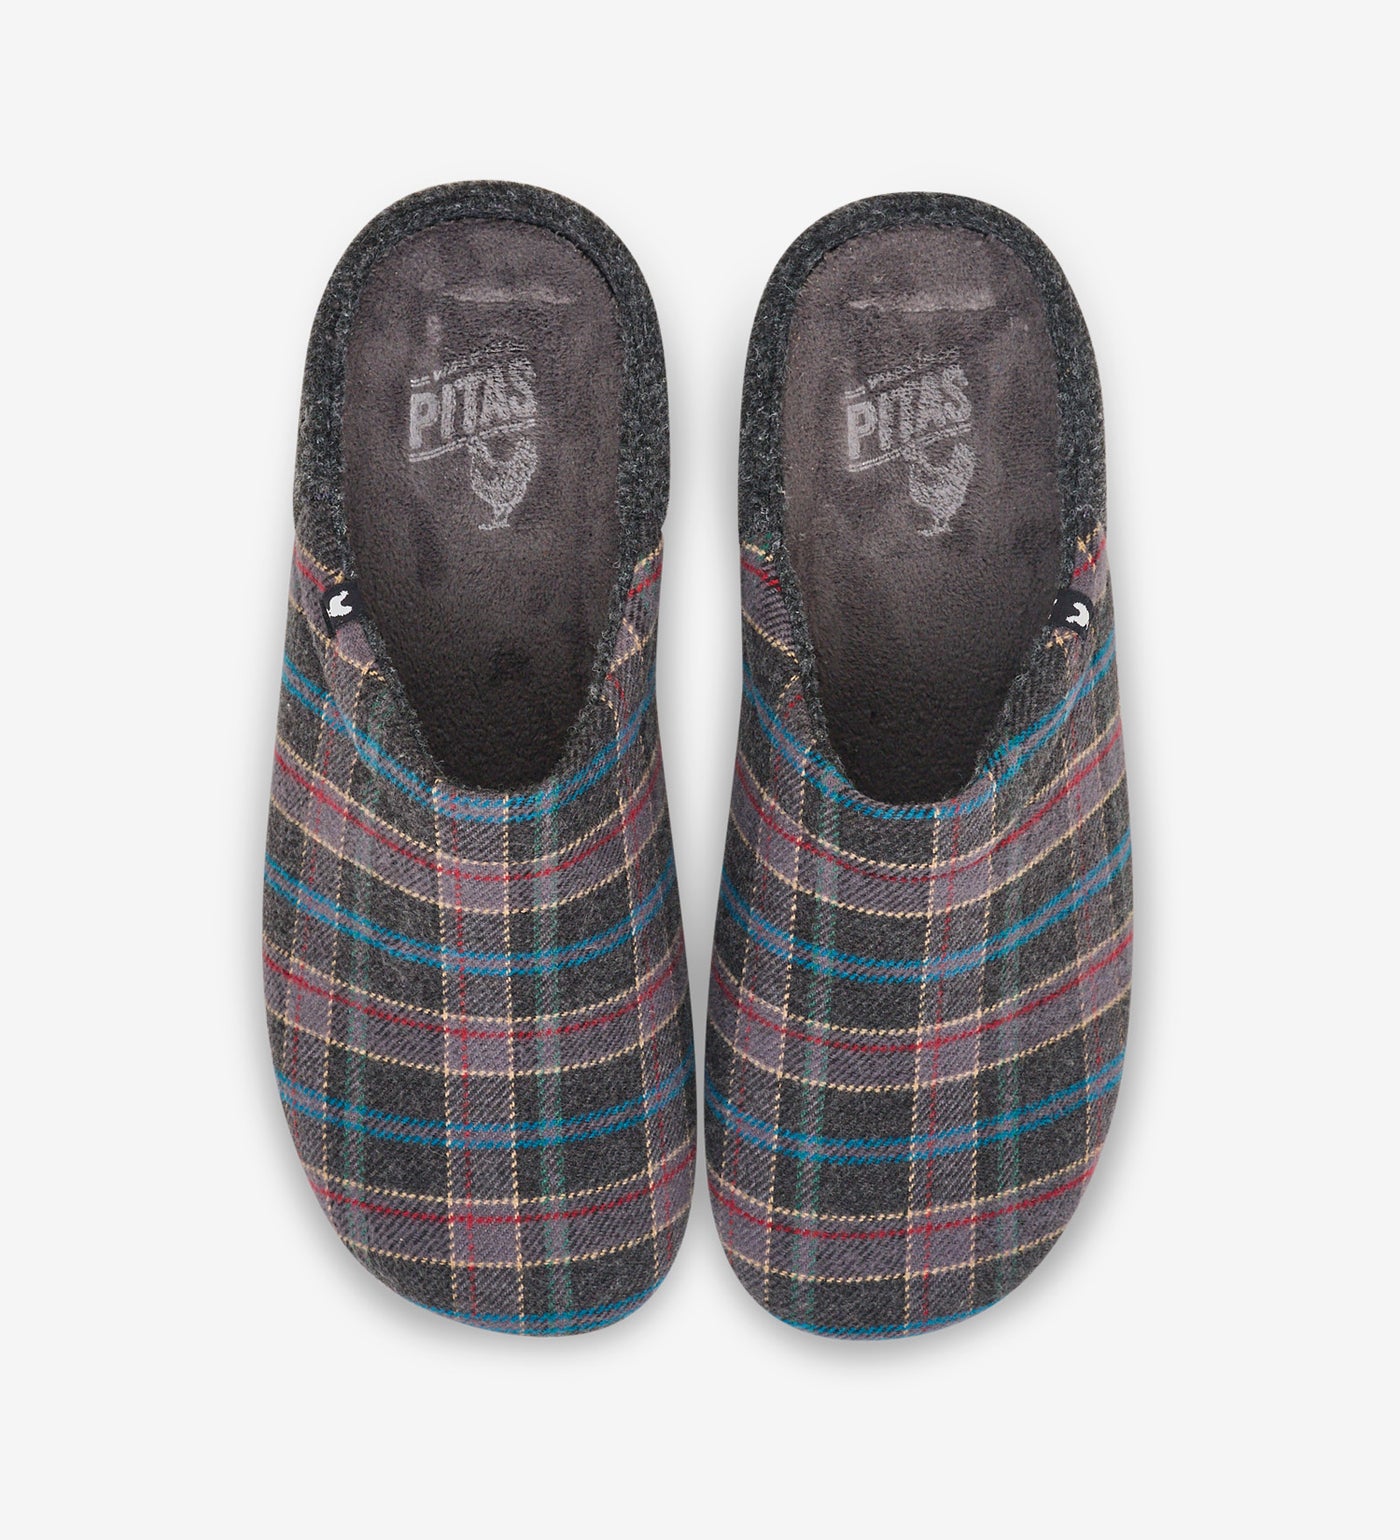 Pitas old timer eco felt mule slippers, grippy rubber soles